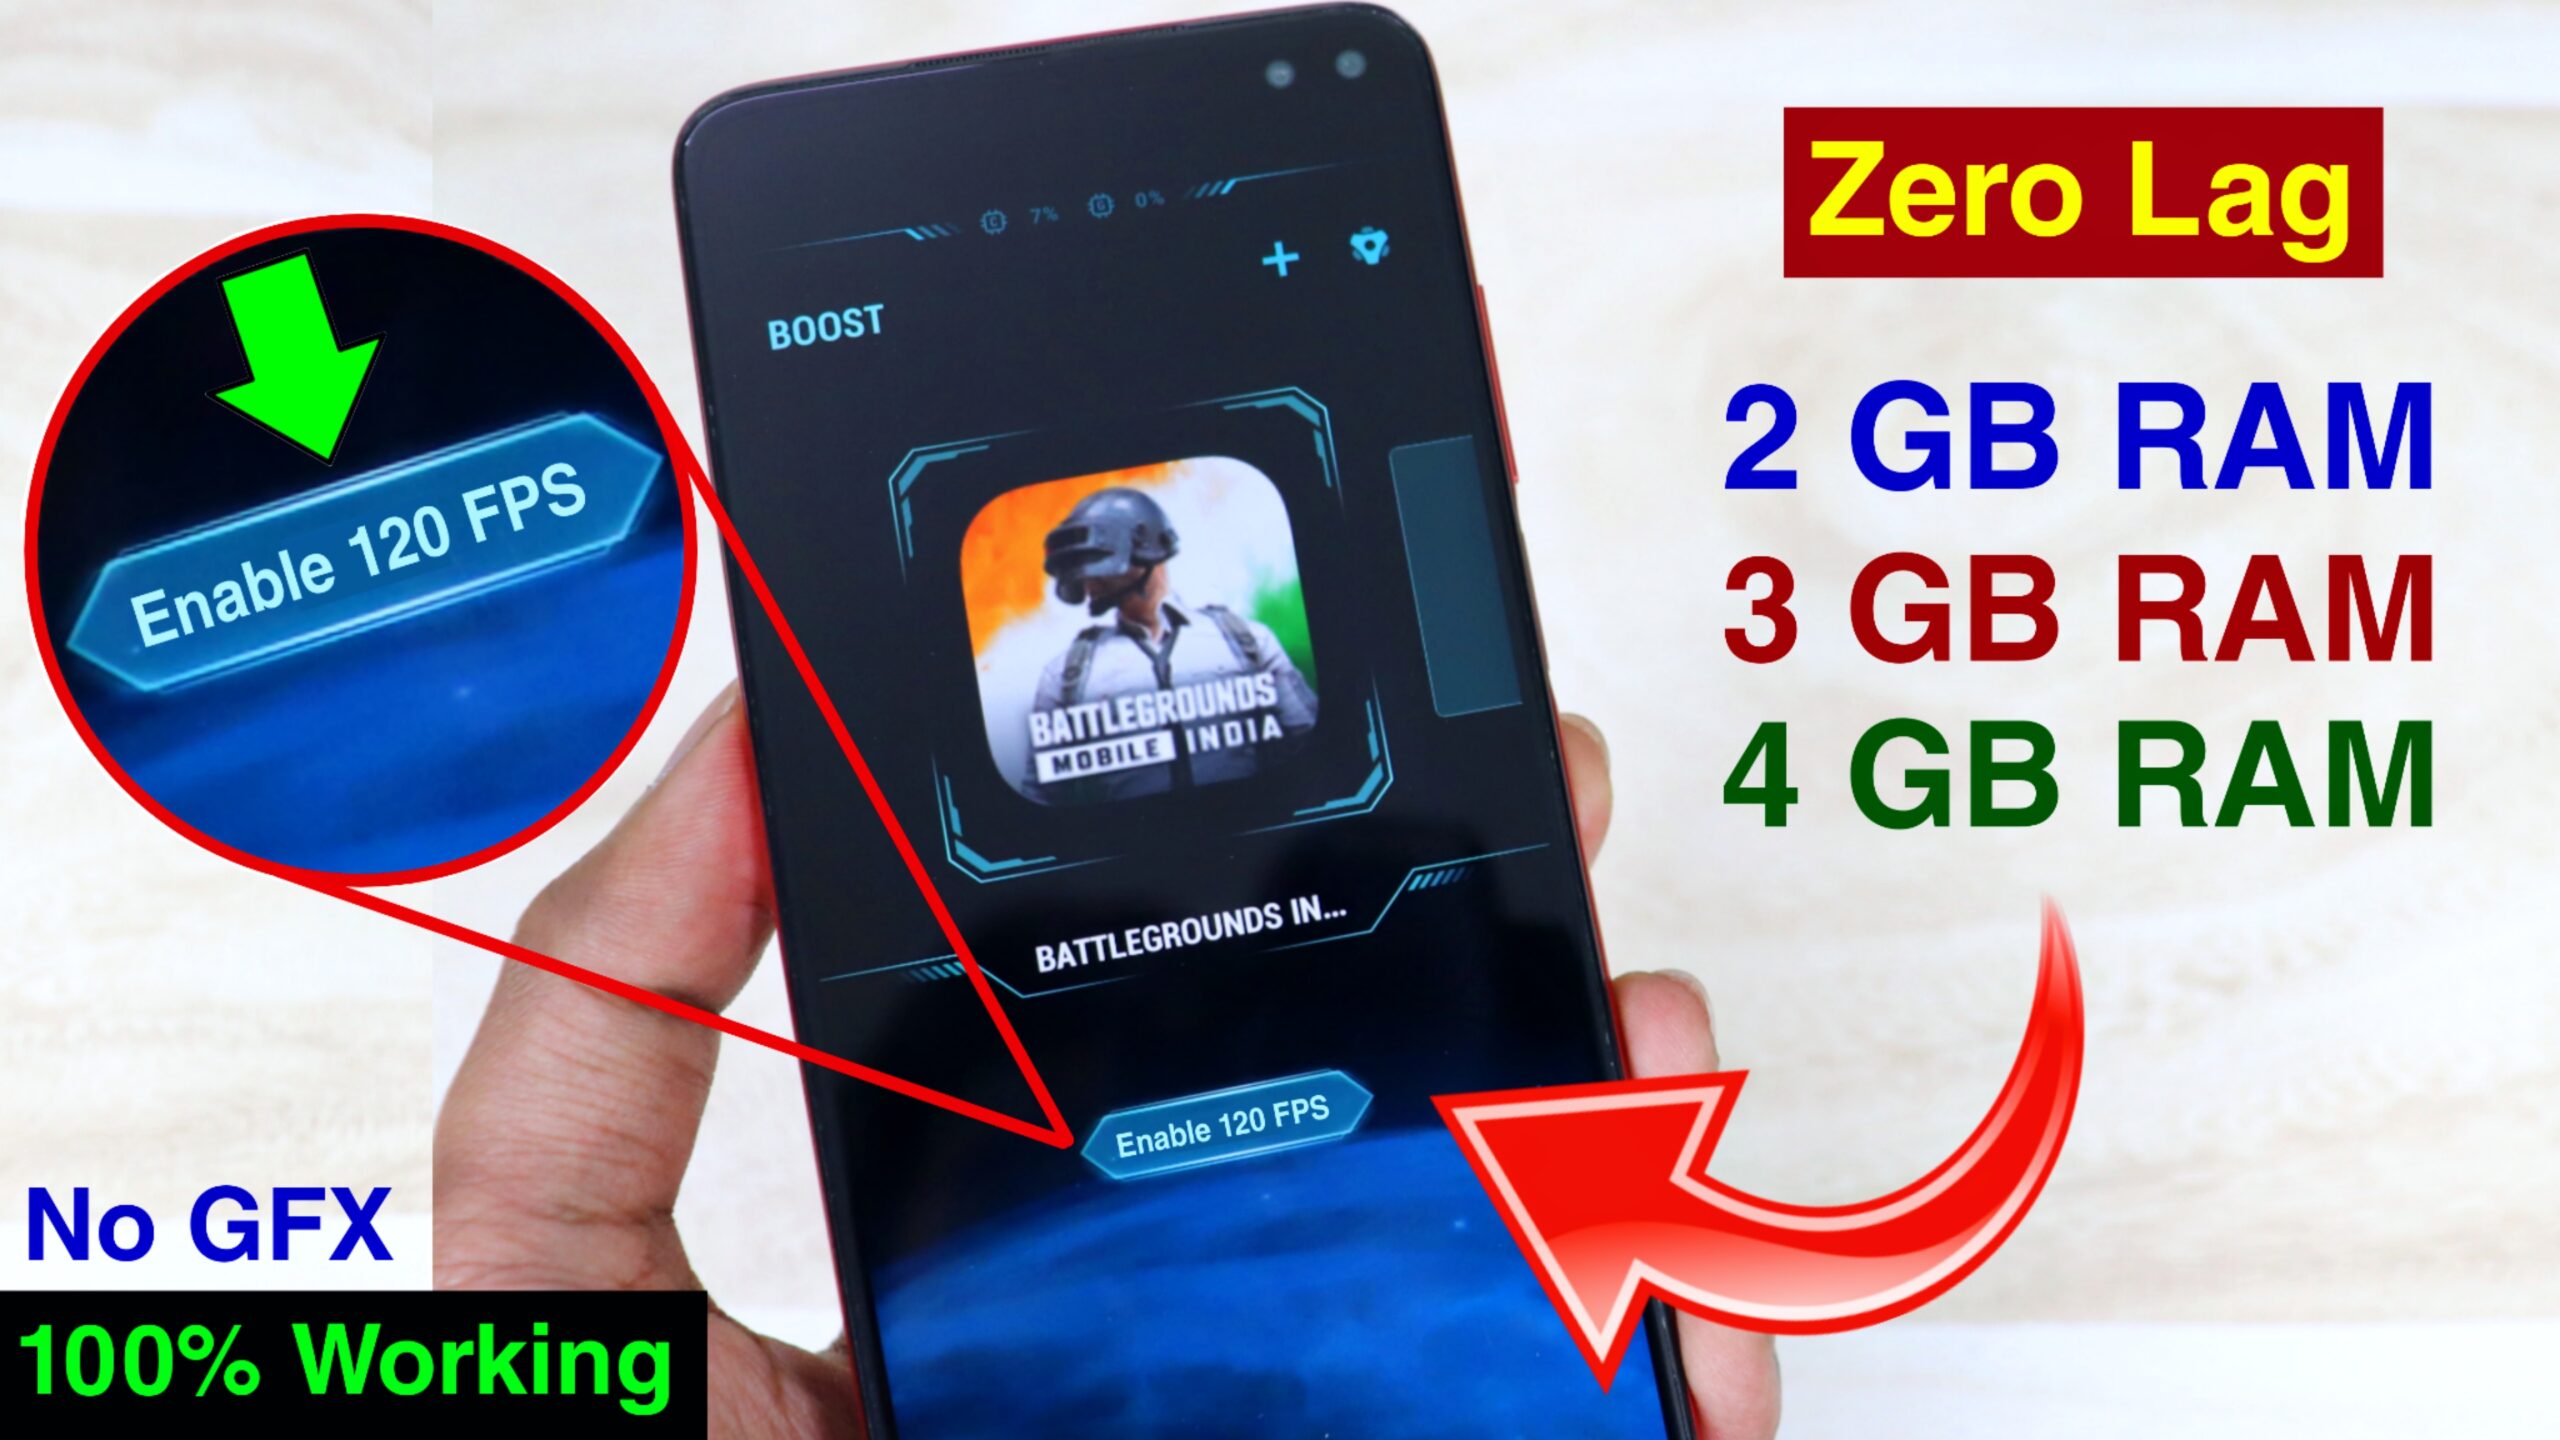 Enable 120 FPS in any phone